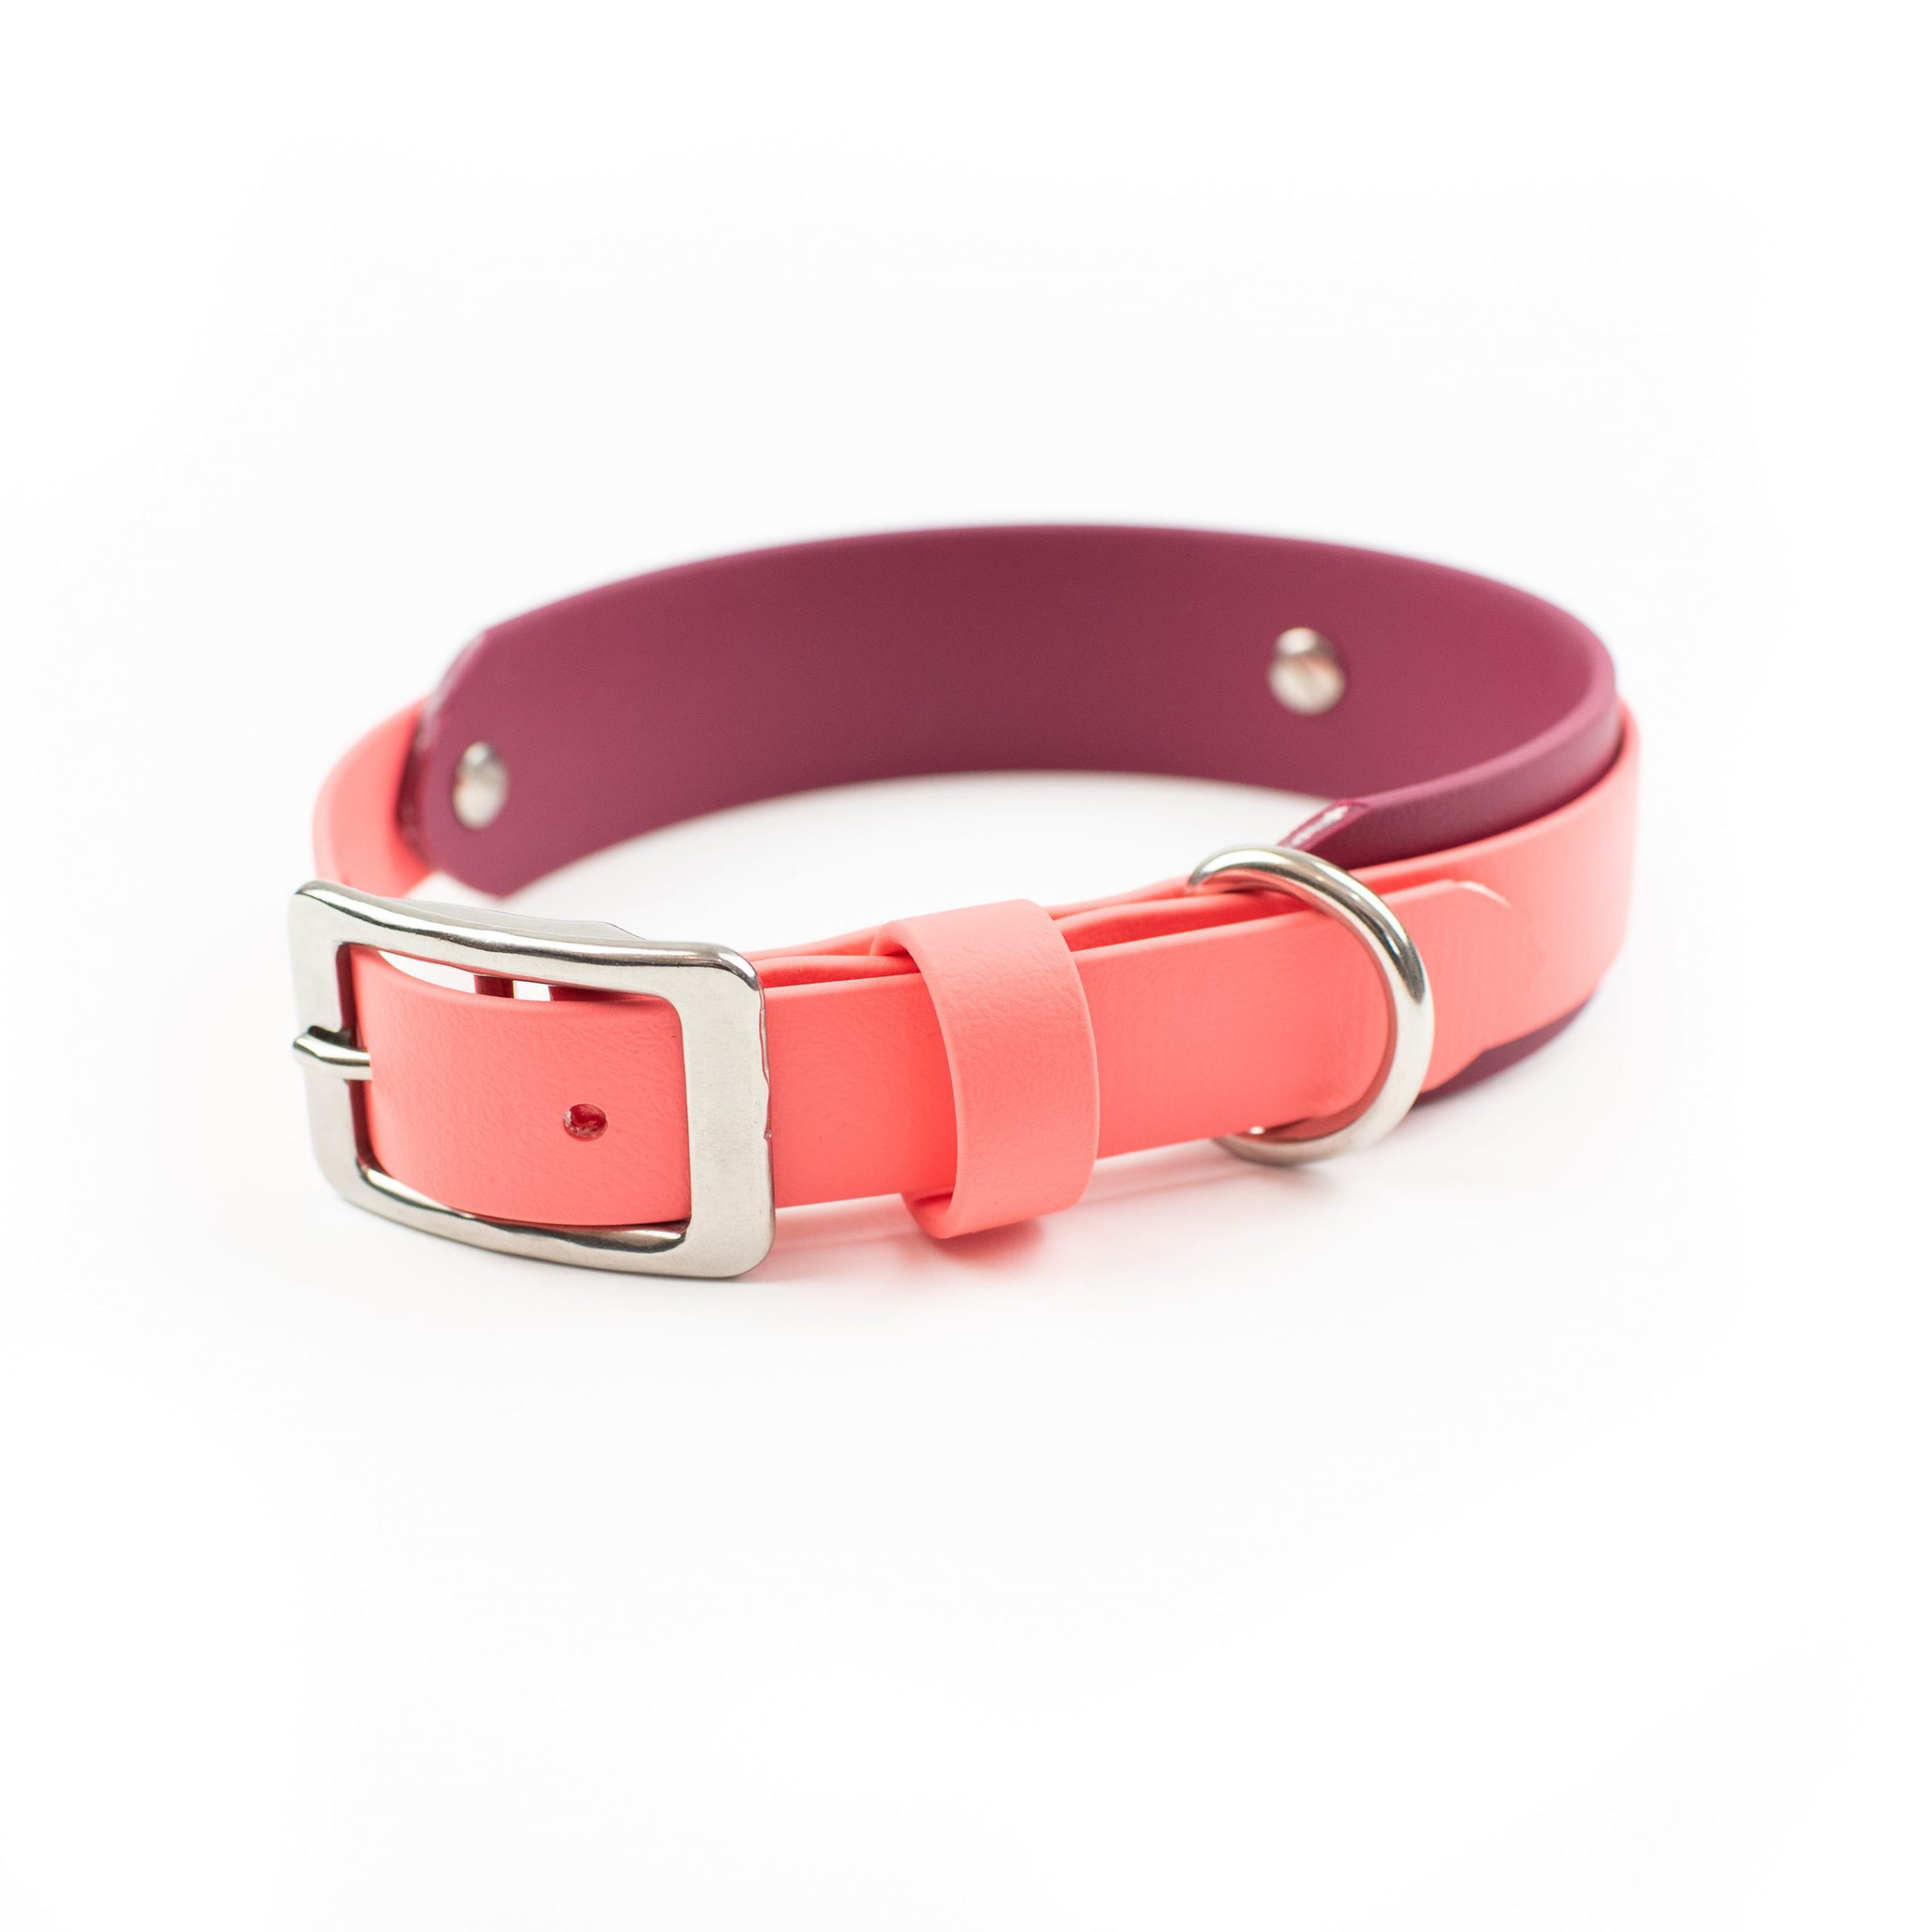 Coral and Burgundy 1.5" Layered Adventure Dog Collar